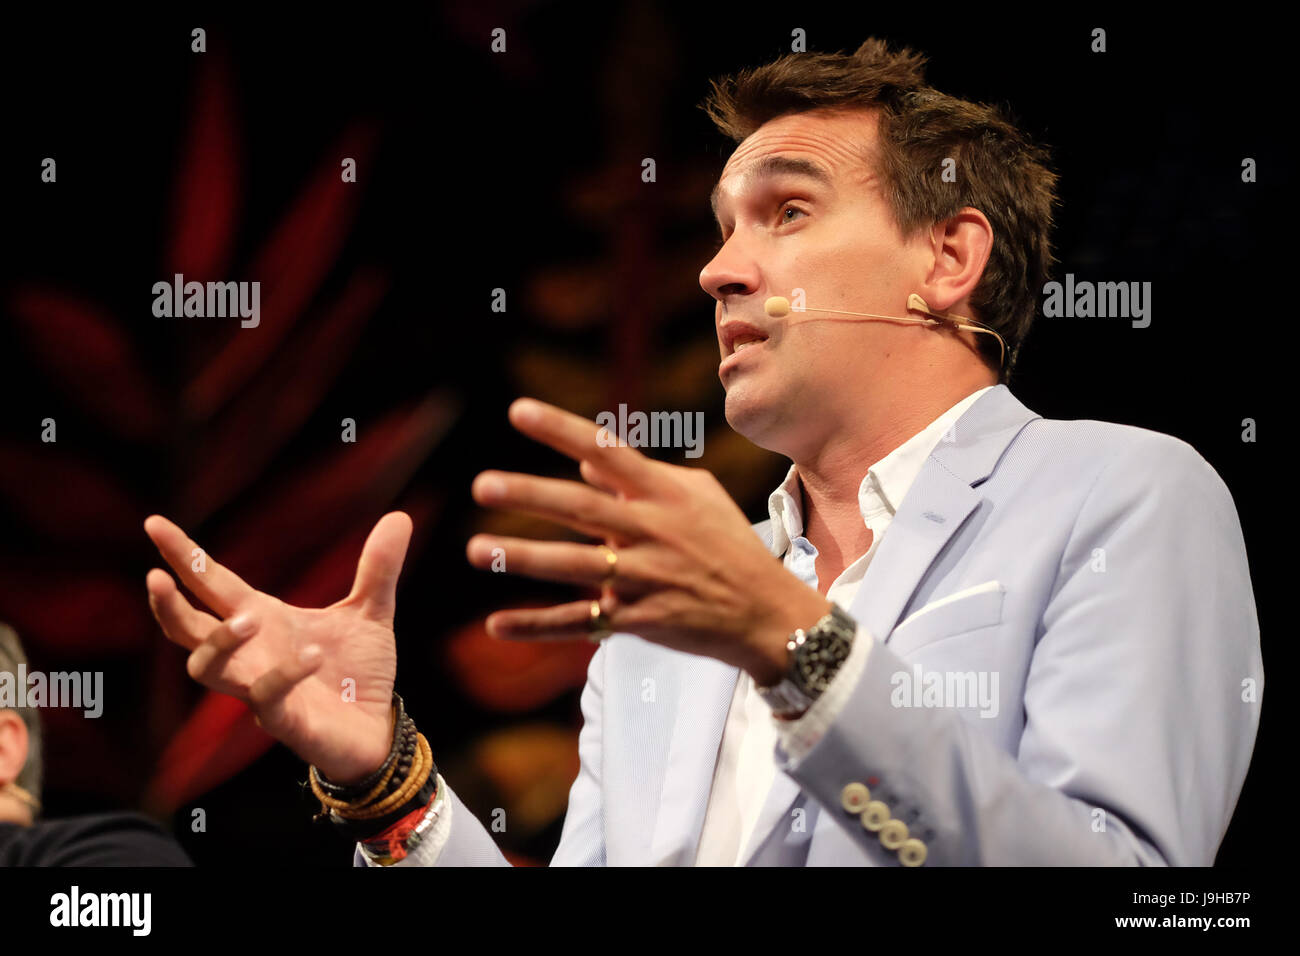 Hay Festival 2017 - Hay on Wye, Wales, UK - Friday 2nd June 2017 - Peter Frankopan historian and author on stage at the Hay Festival - Frankopan is Director of the Centre for Byzantine Research at Oxford University - the Hay Festival celebrates its 30th anniversary in 2017 - the literary festival runs until Sunday June 4th.  Steven May / Alamy Live News Stock Photo